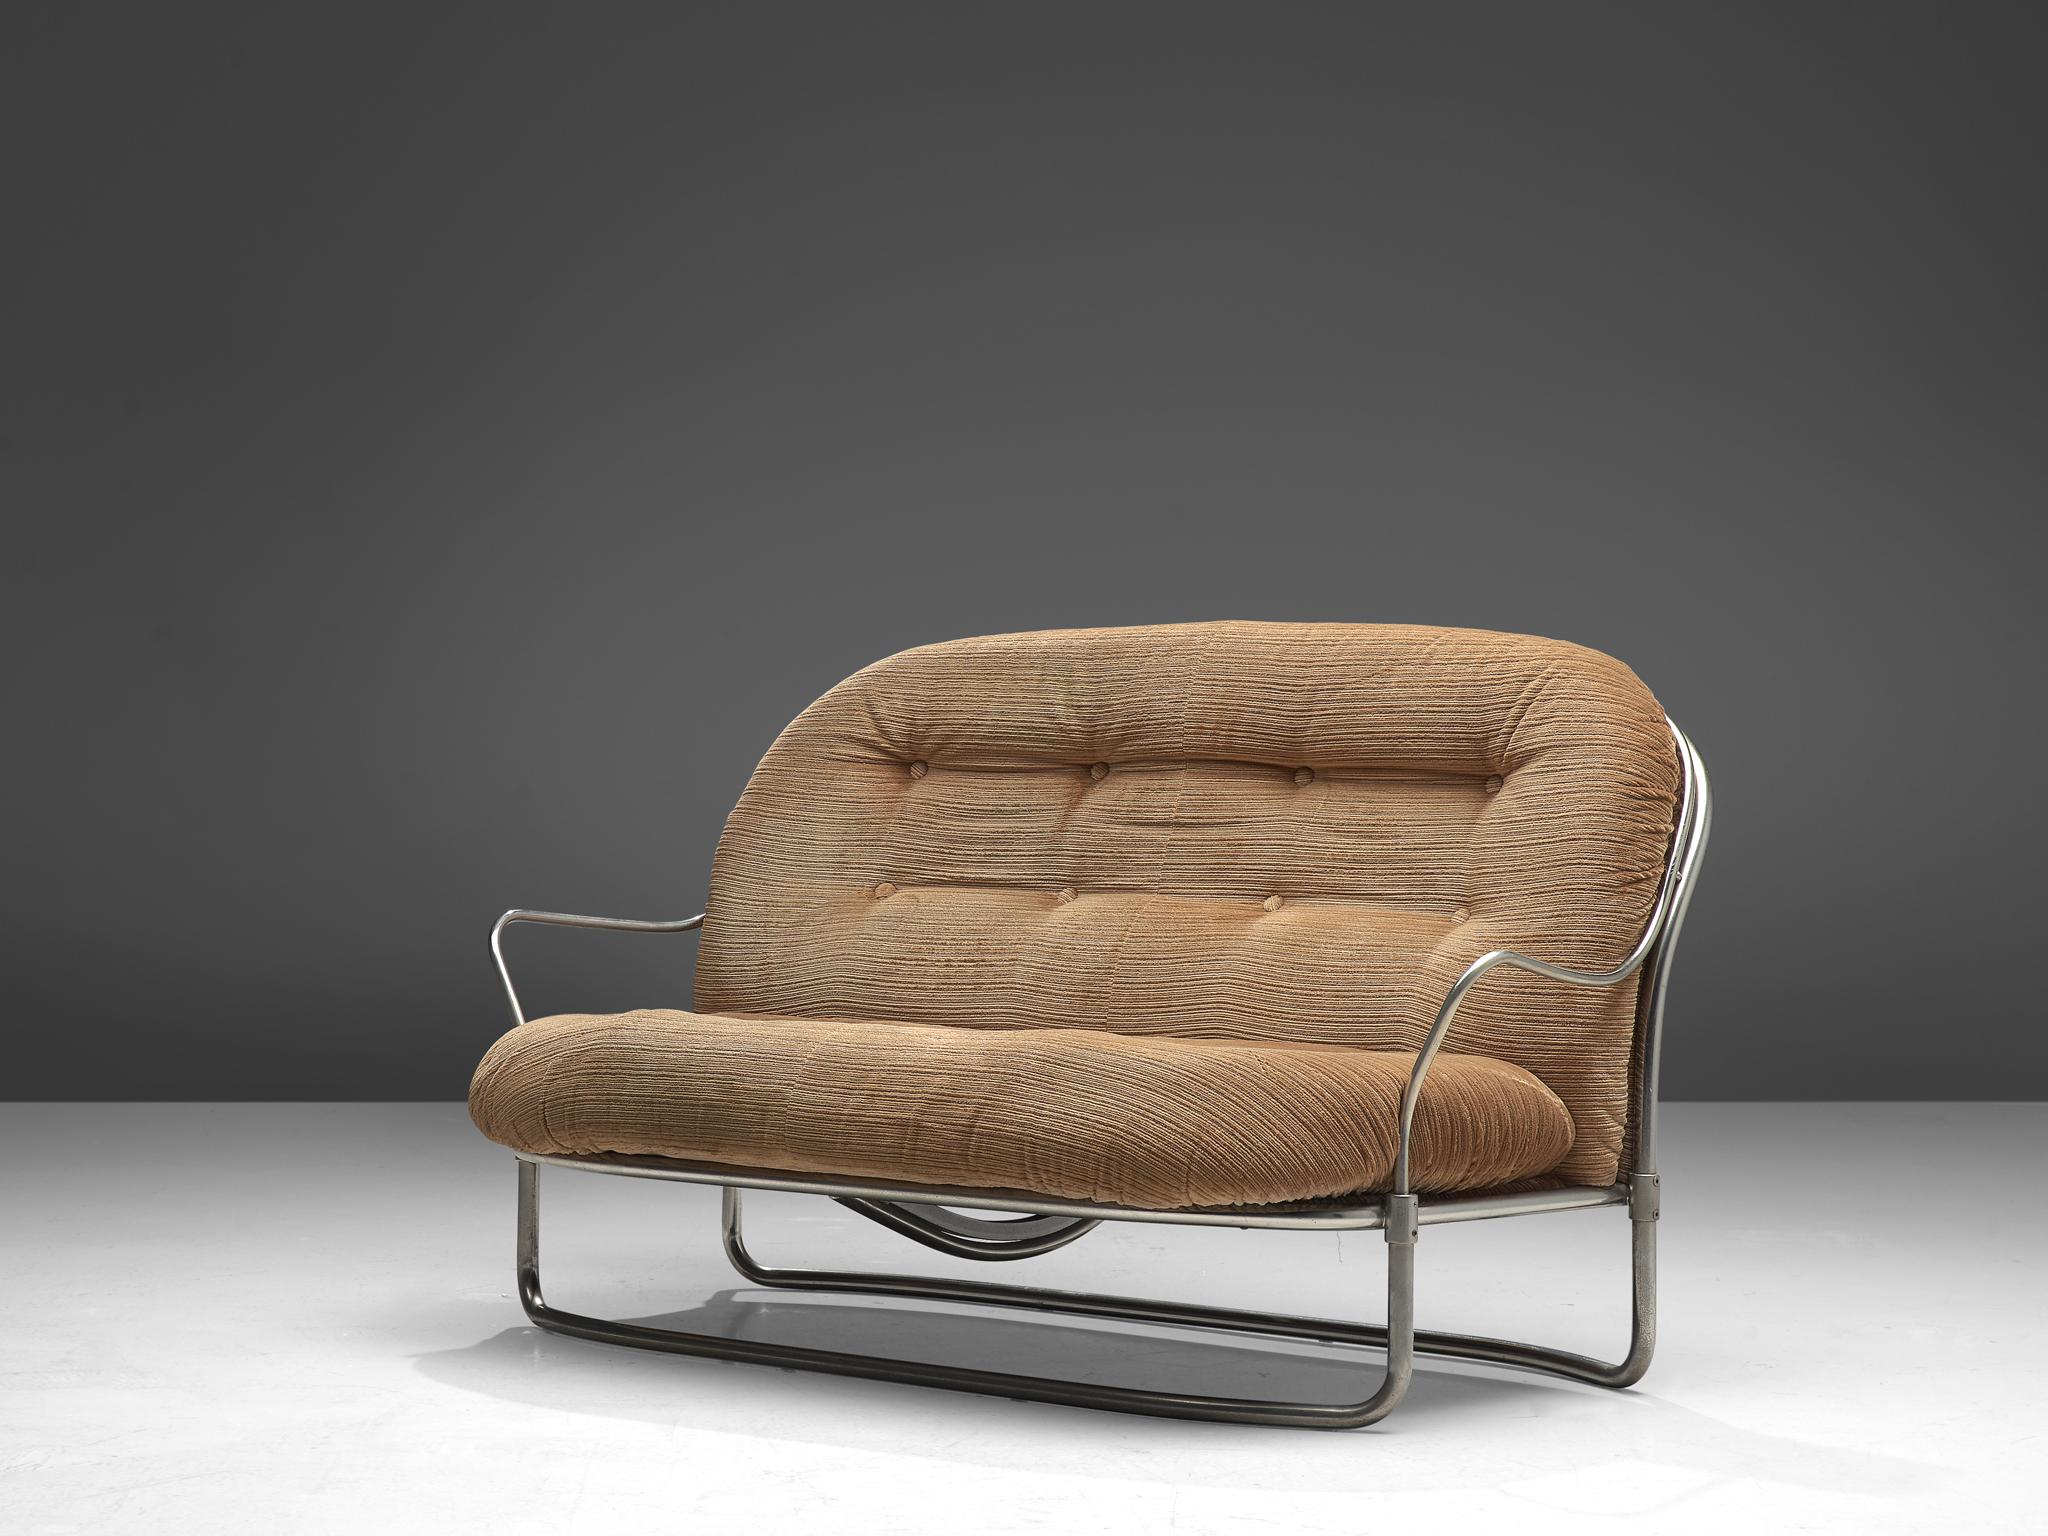 Carlo de Carli for Cinova, sofa No. 915, metal and fabric, Italy, 1969.

Elegant, tubular settee designed by Carlo de Carli in 1969 and manufactured by Cinova/Italy. The model features a curved, nickled-plated frame that holds the large, tufted